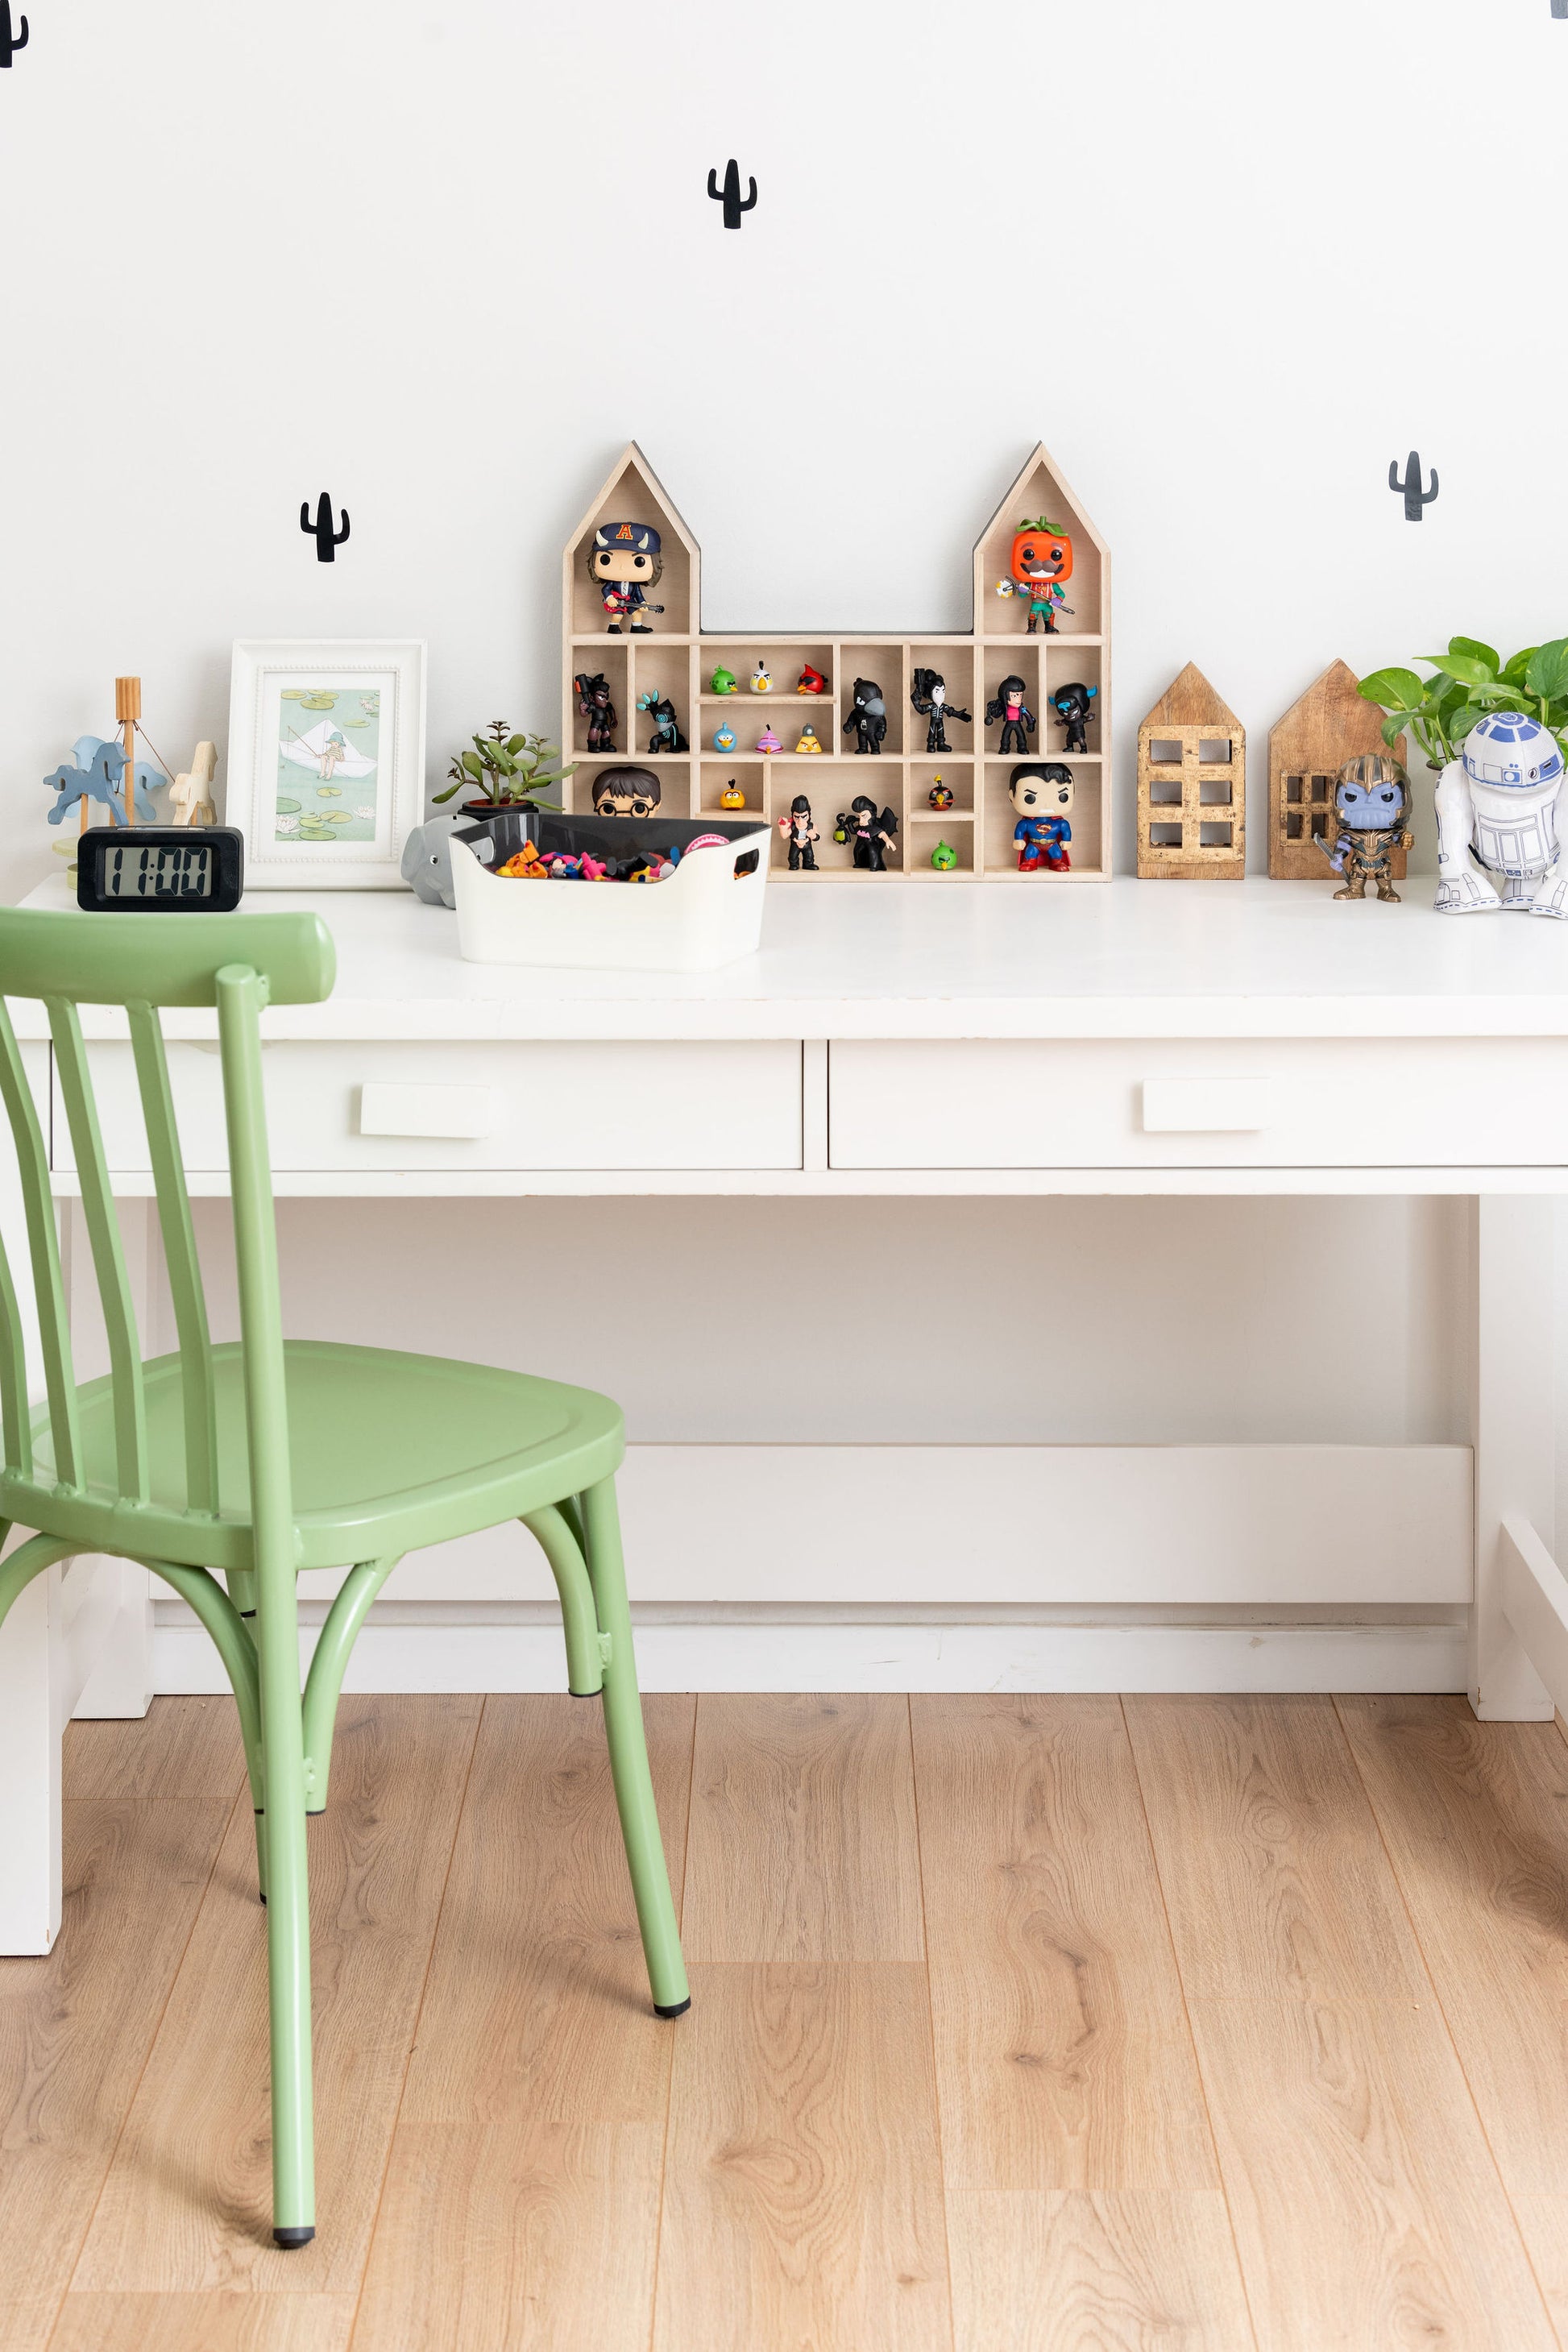 A boy's desk and chair with a castle-shaped wooden toy display shelf standing on it with POP figures and angry birds 